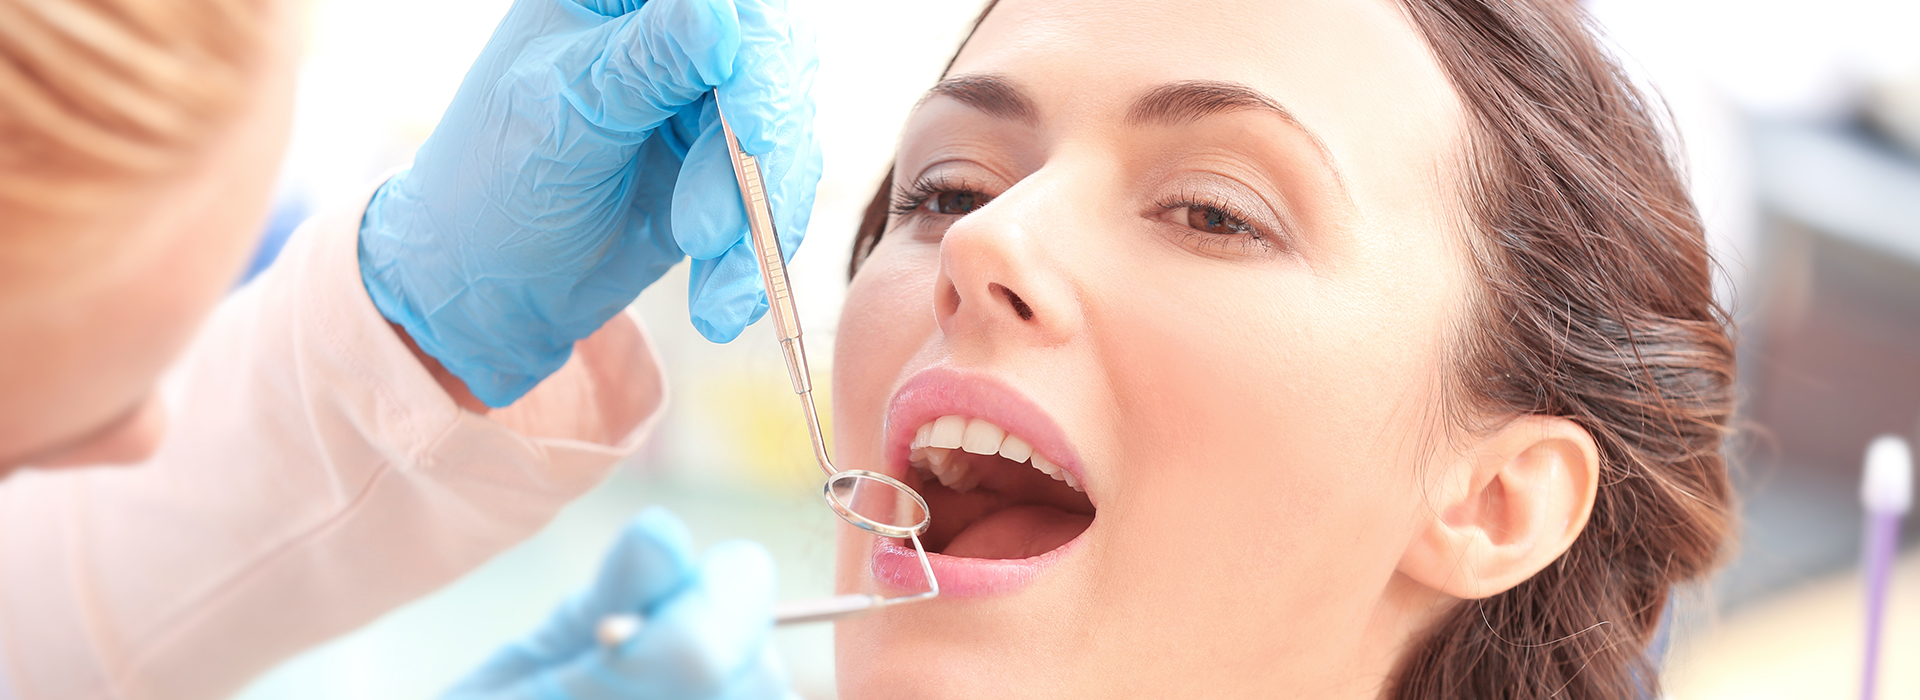 Lodi Family Dentistry | Teeth Whitening, Root Canals and Oral Cancer Screening